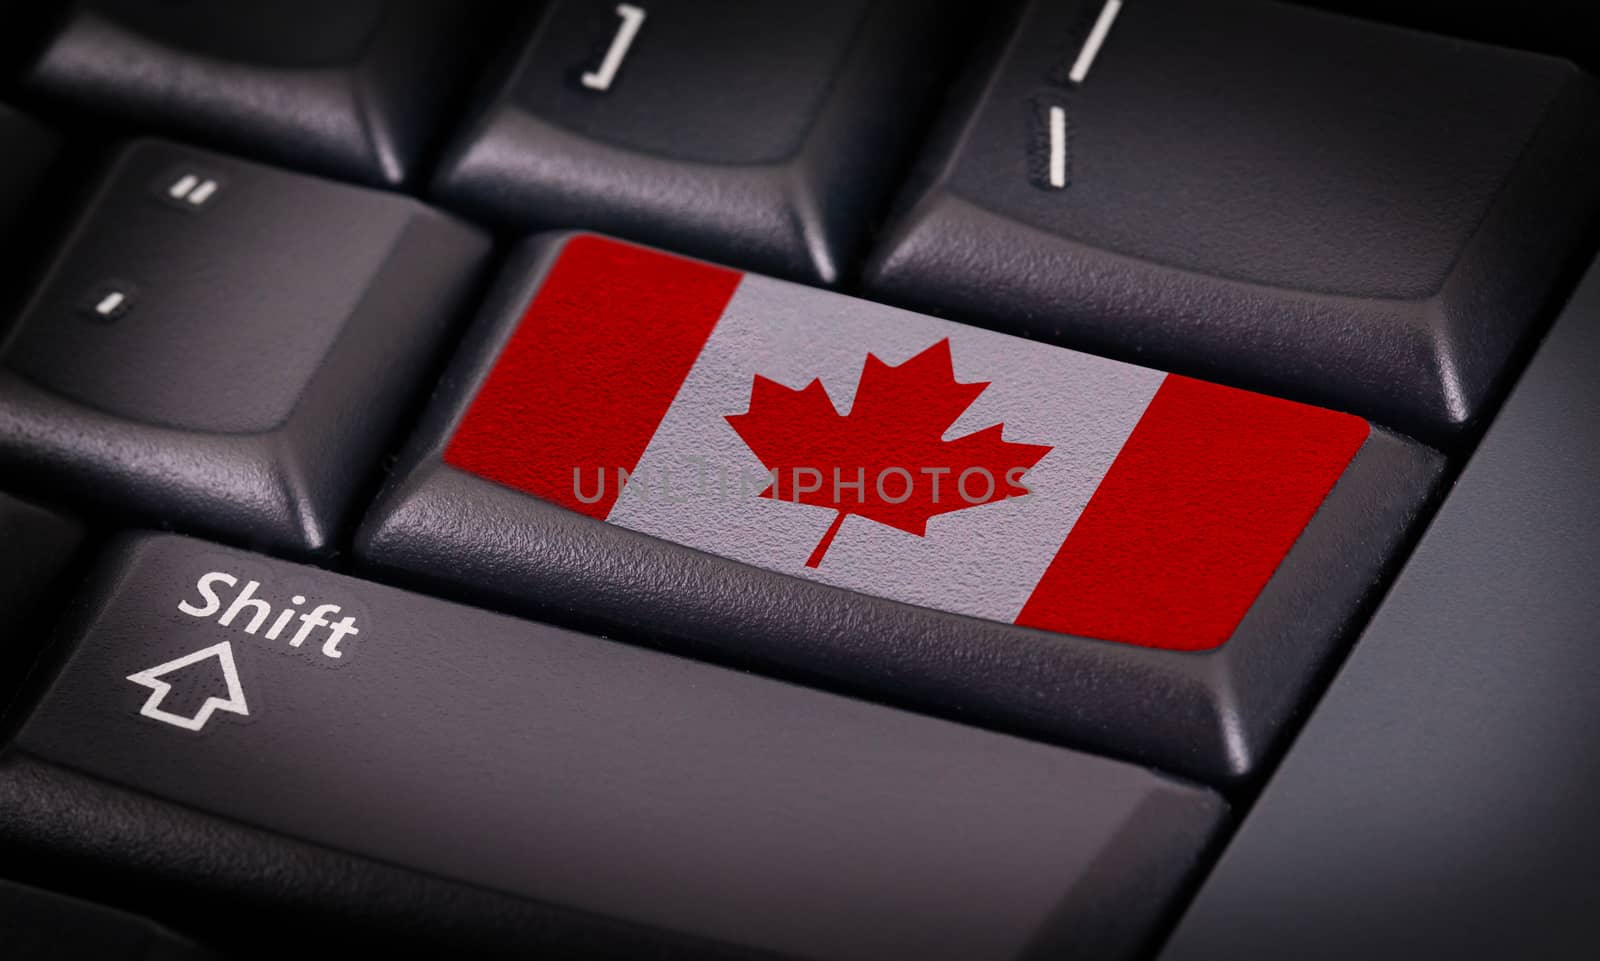 Flag on button keyboard, flag of Canada